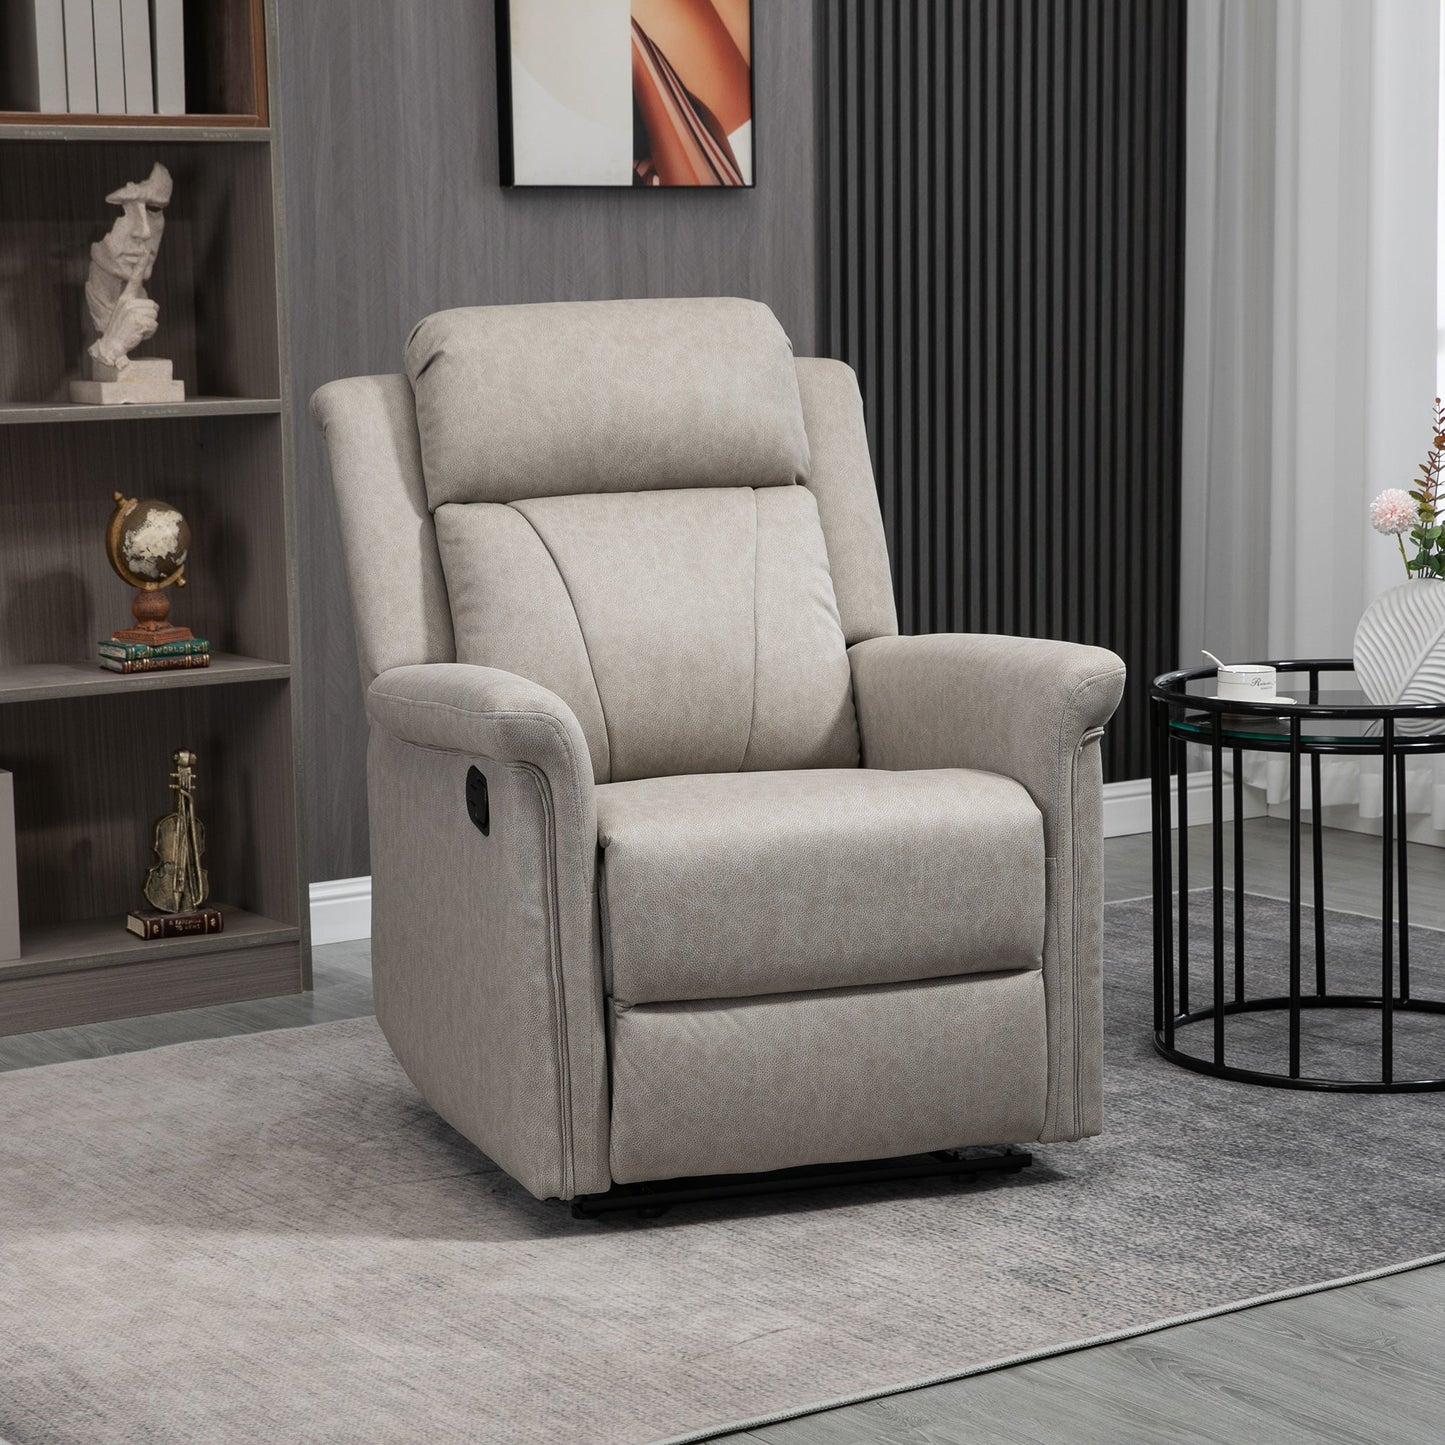 Retlinable armchair manually 135 ° with footrests, headrests and padded armrests, 78x96x102 cm, Grey